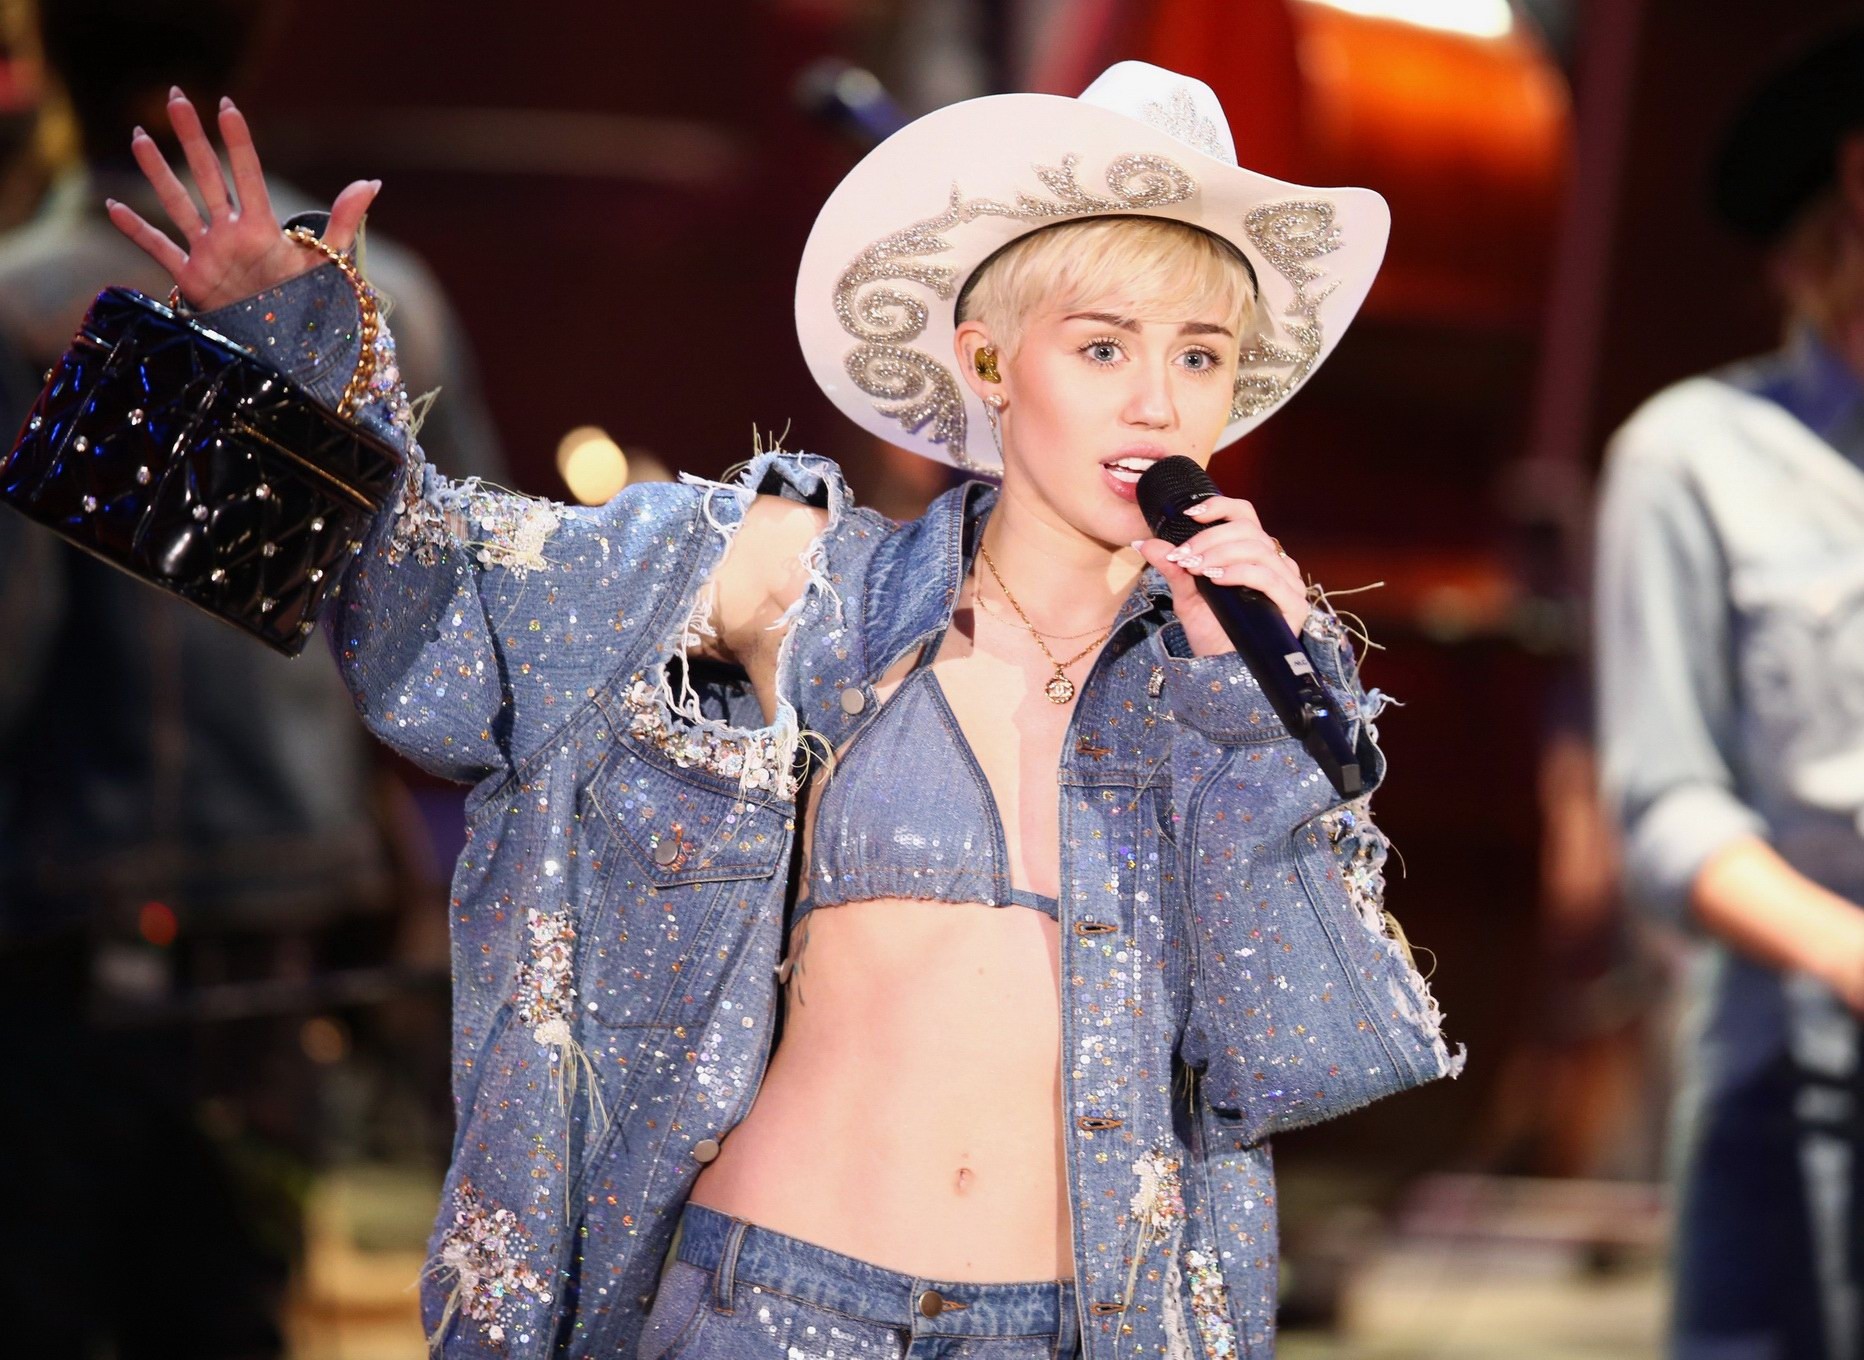 Miley Cyrus perofrming in denim bra  ripped jeans at MTV Unplugged in Hollywood  #75205889